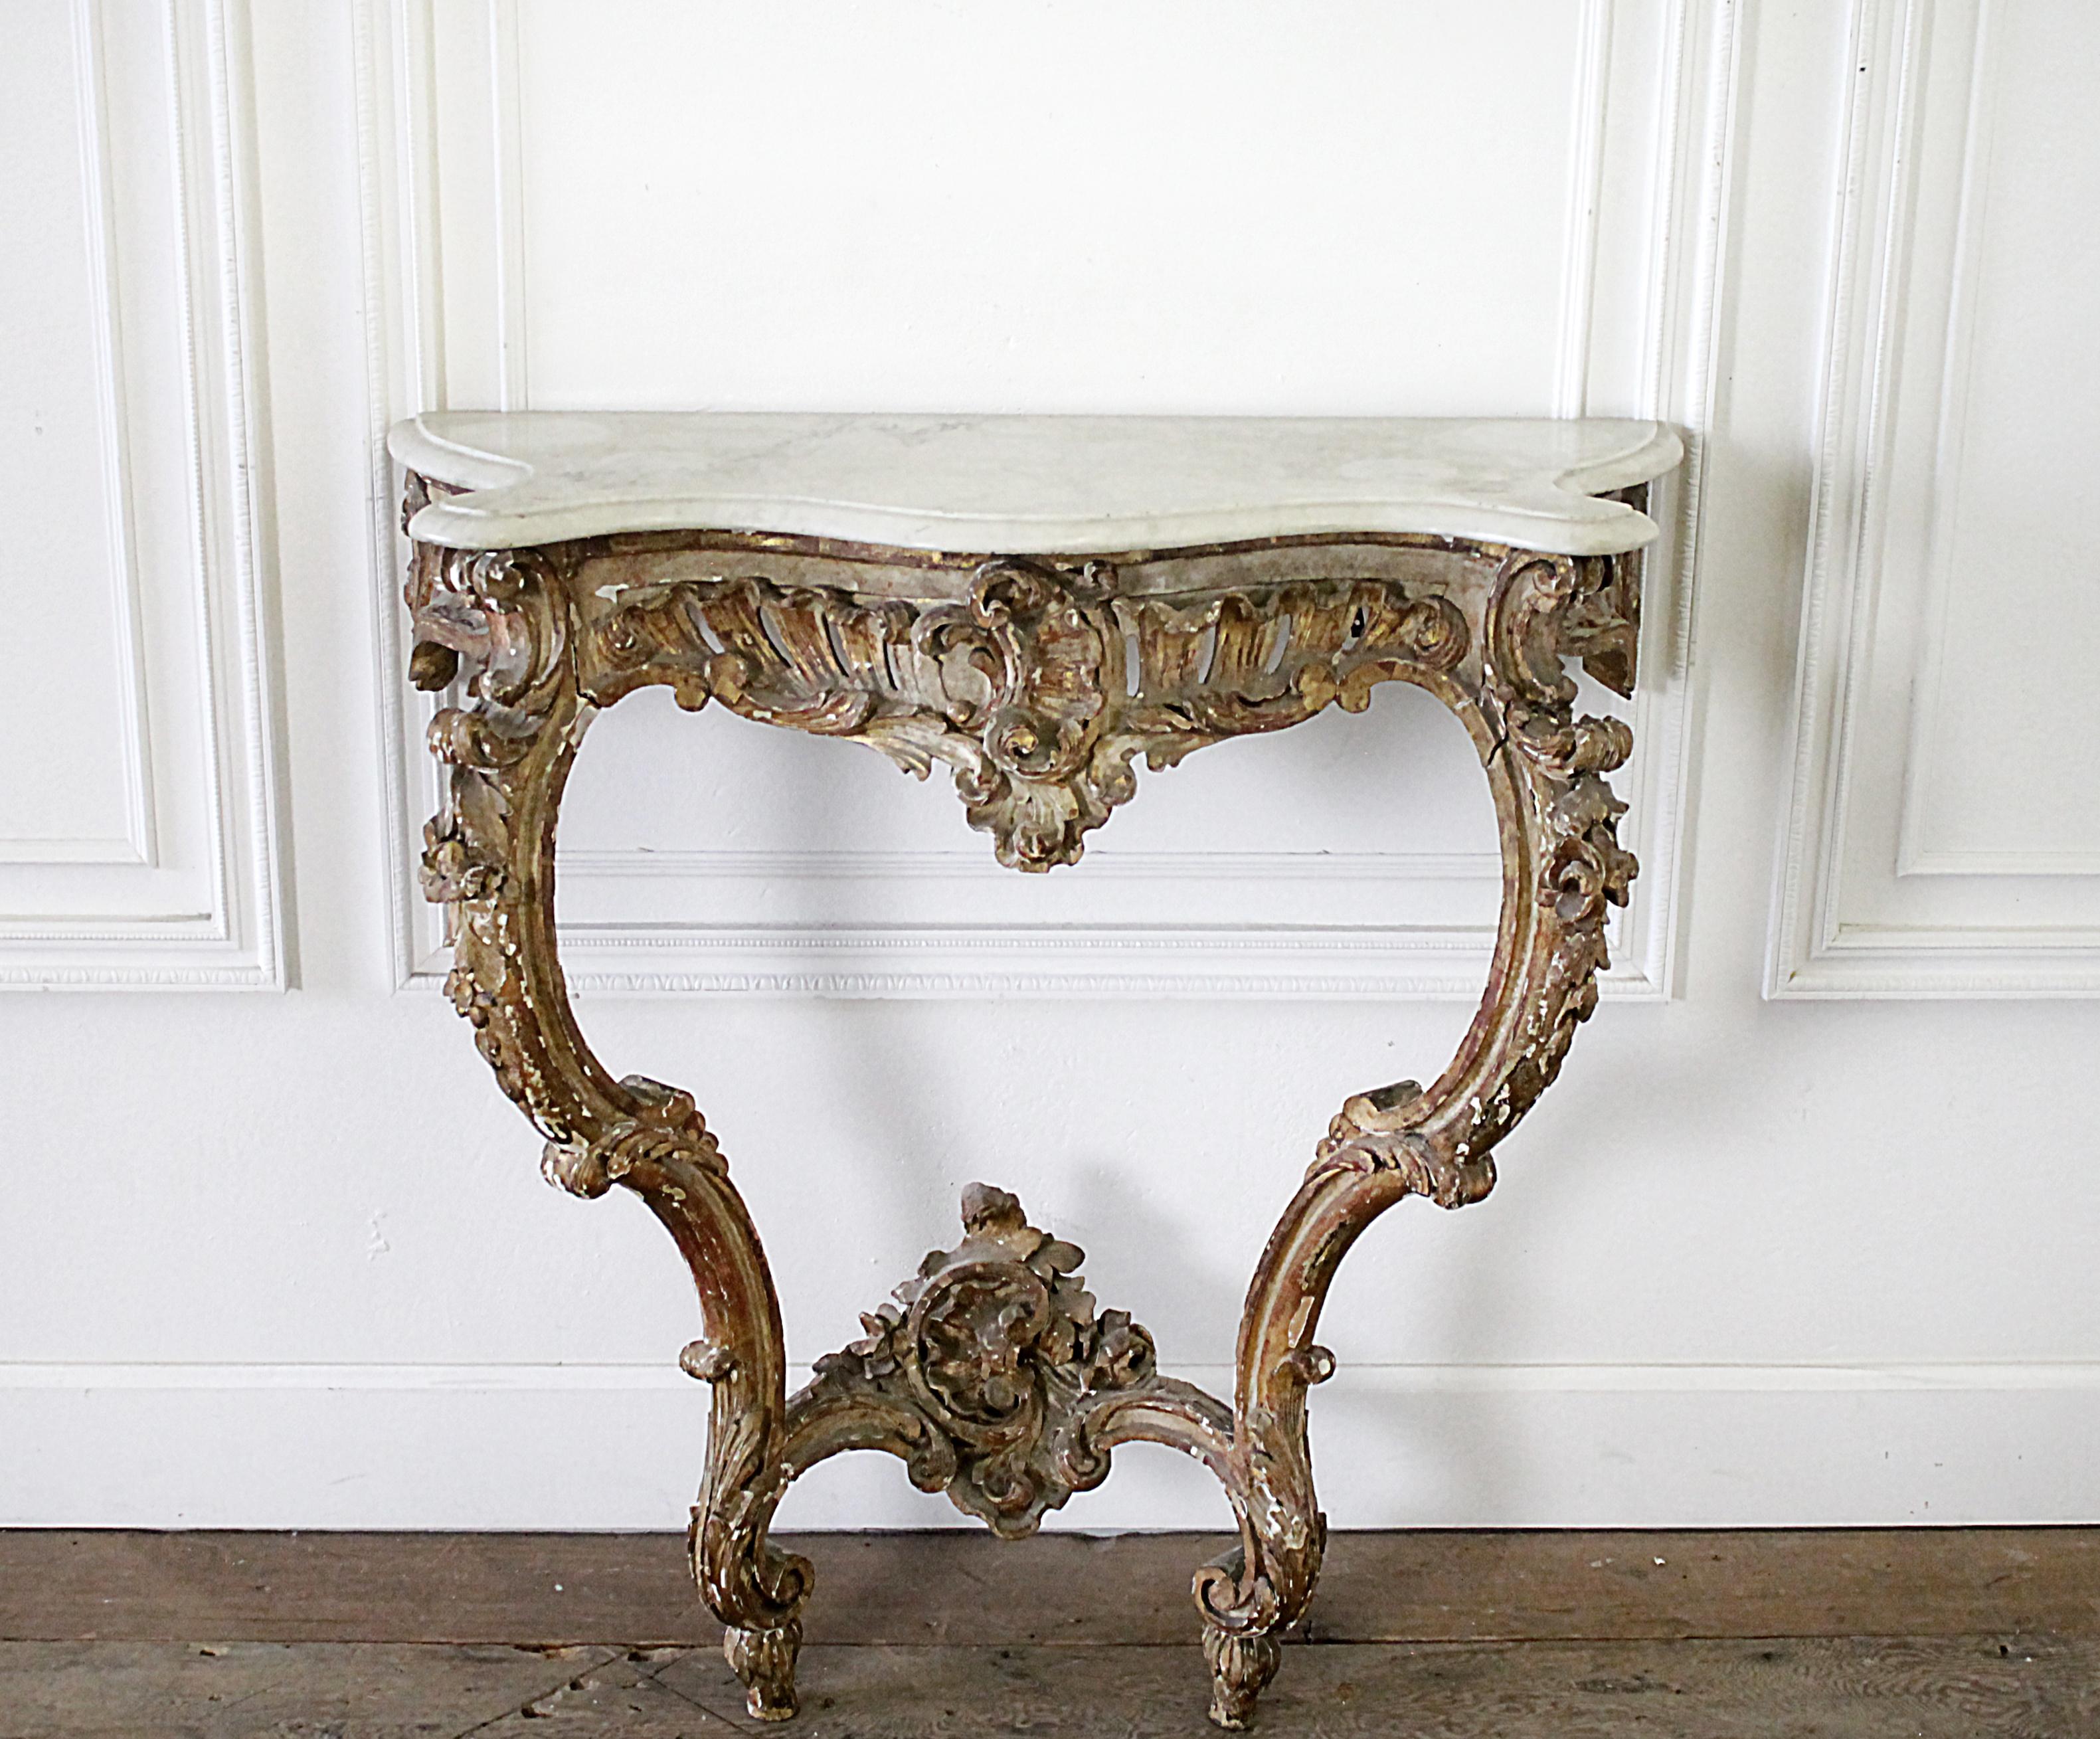 19th century giltwood Louis XV style console with marble top
Very patina’d this console table is beautifully carved, with a white and grey Carrara marble top. The right leg has been repaired at some point, you can see there is a separation in the